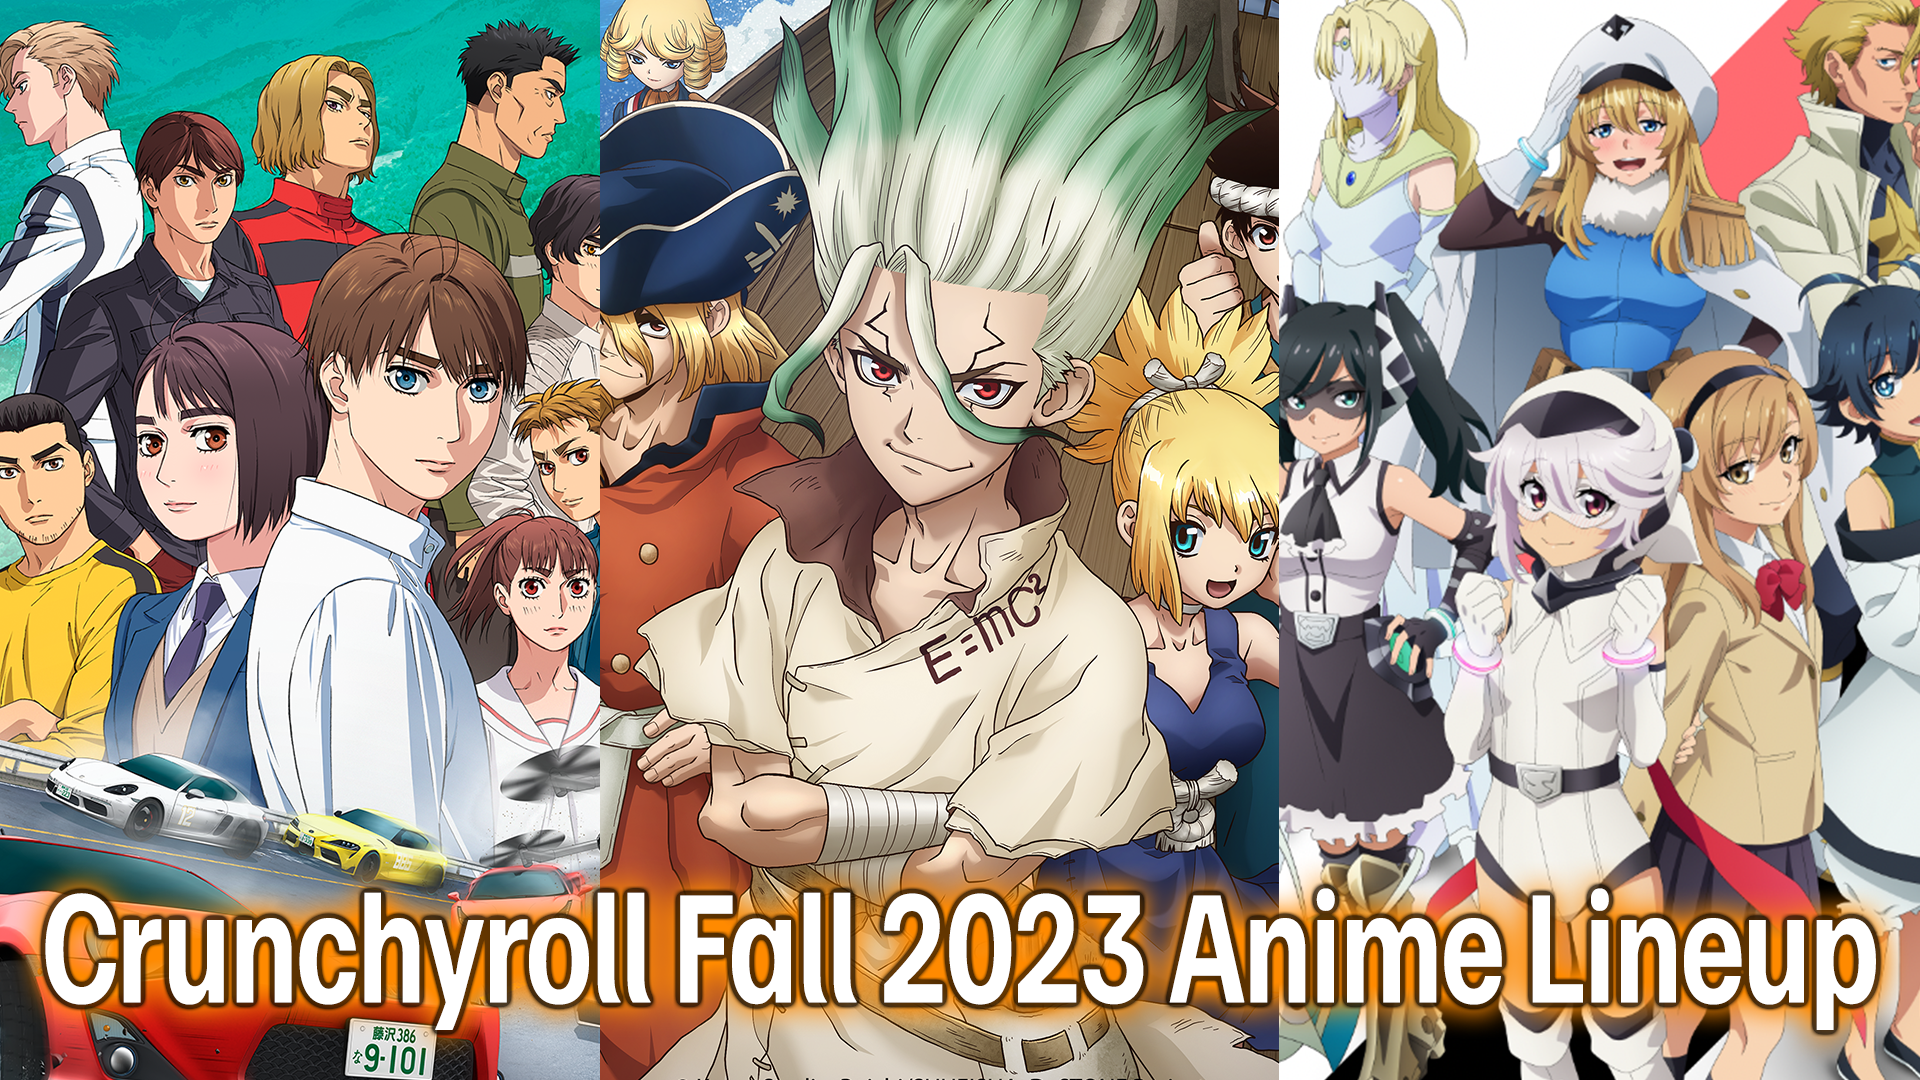 Crunchyroll Announces More New 2023 Anime Series at Anime Frontier